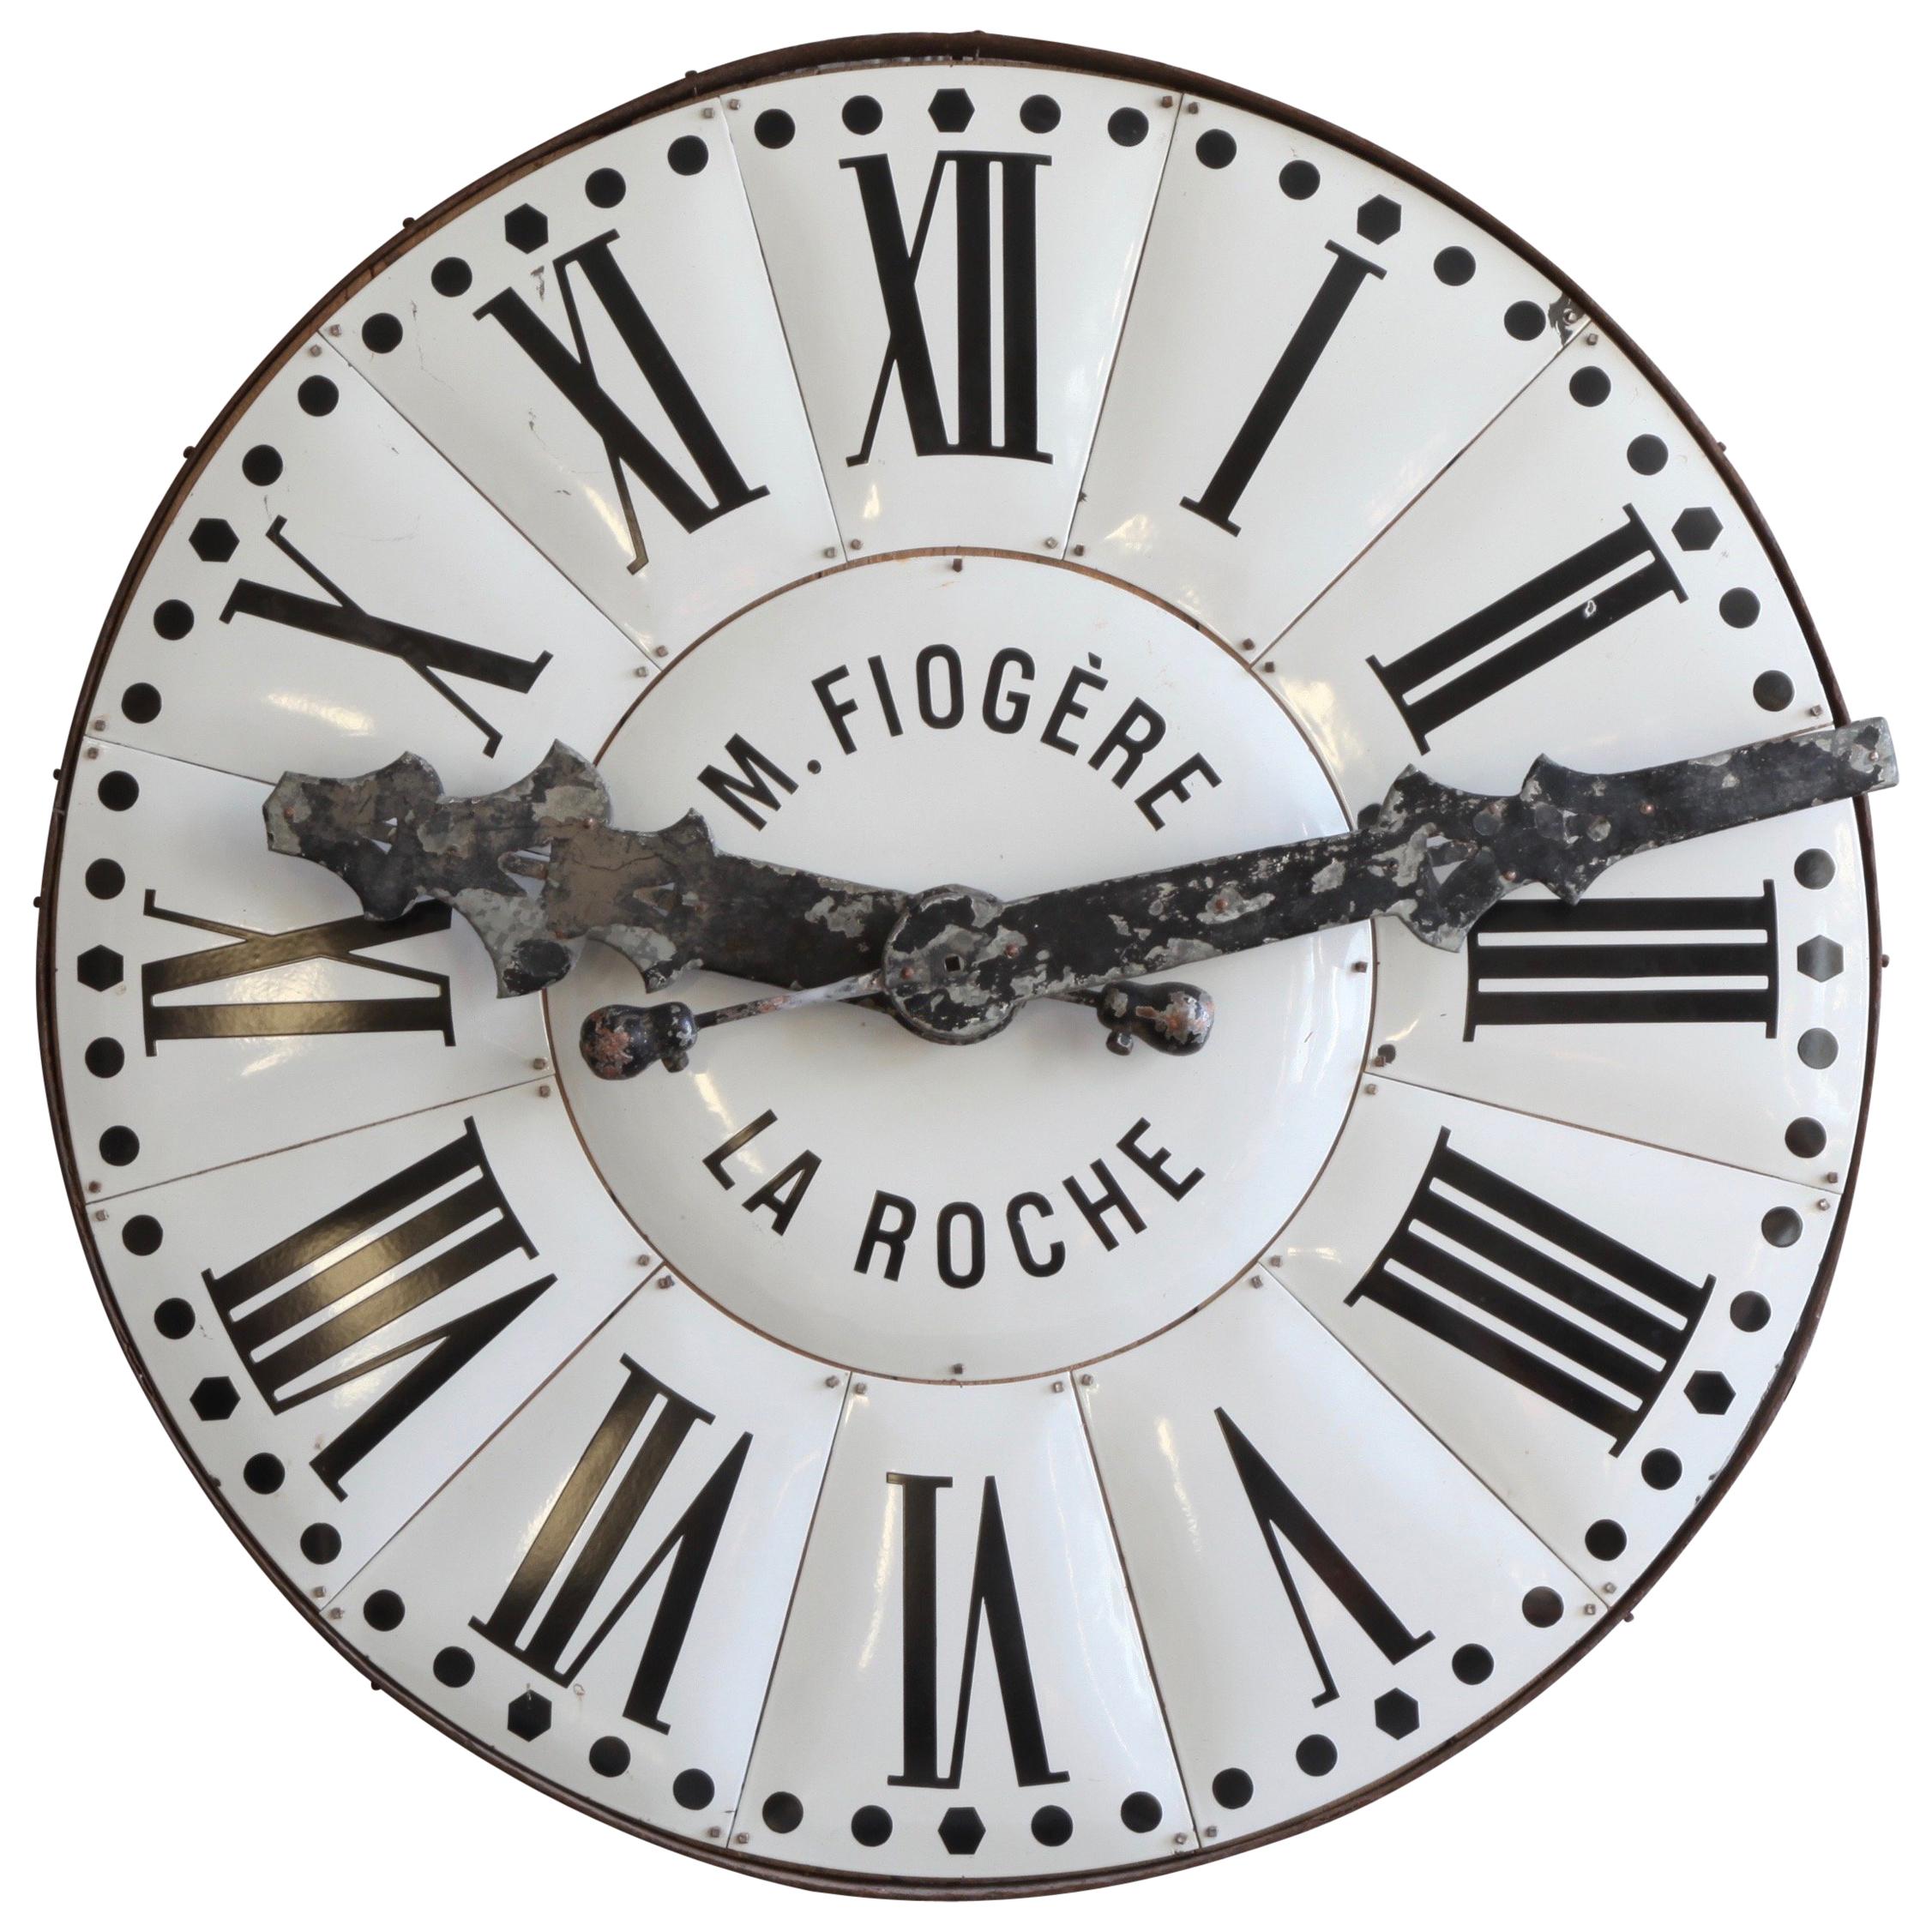 Large French Turn of the Century White Enamelled Clock Face from La Roche